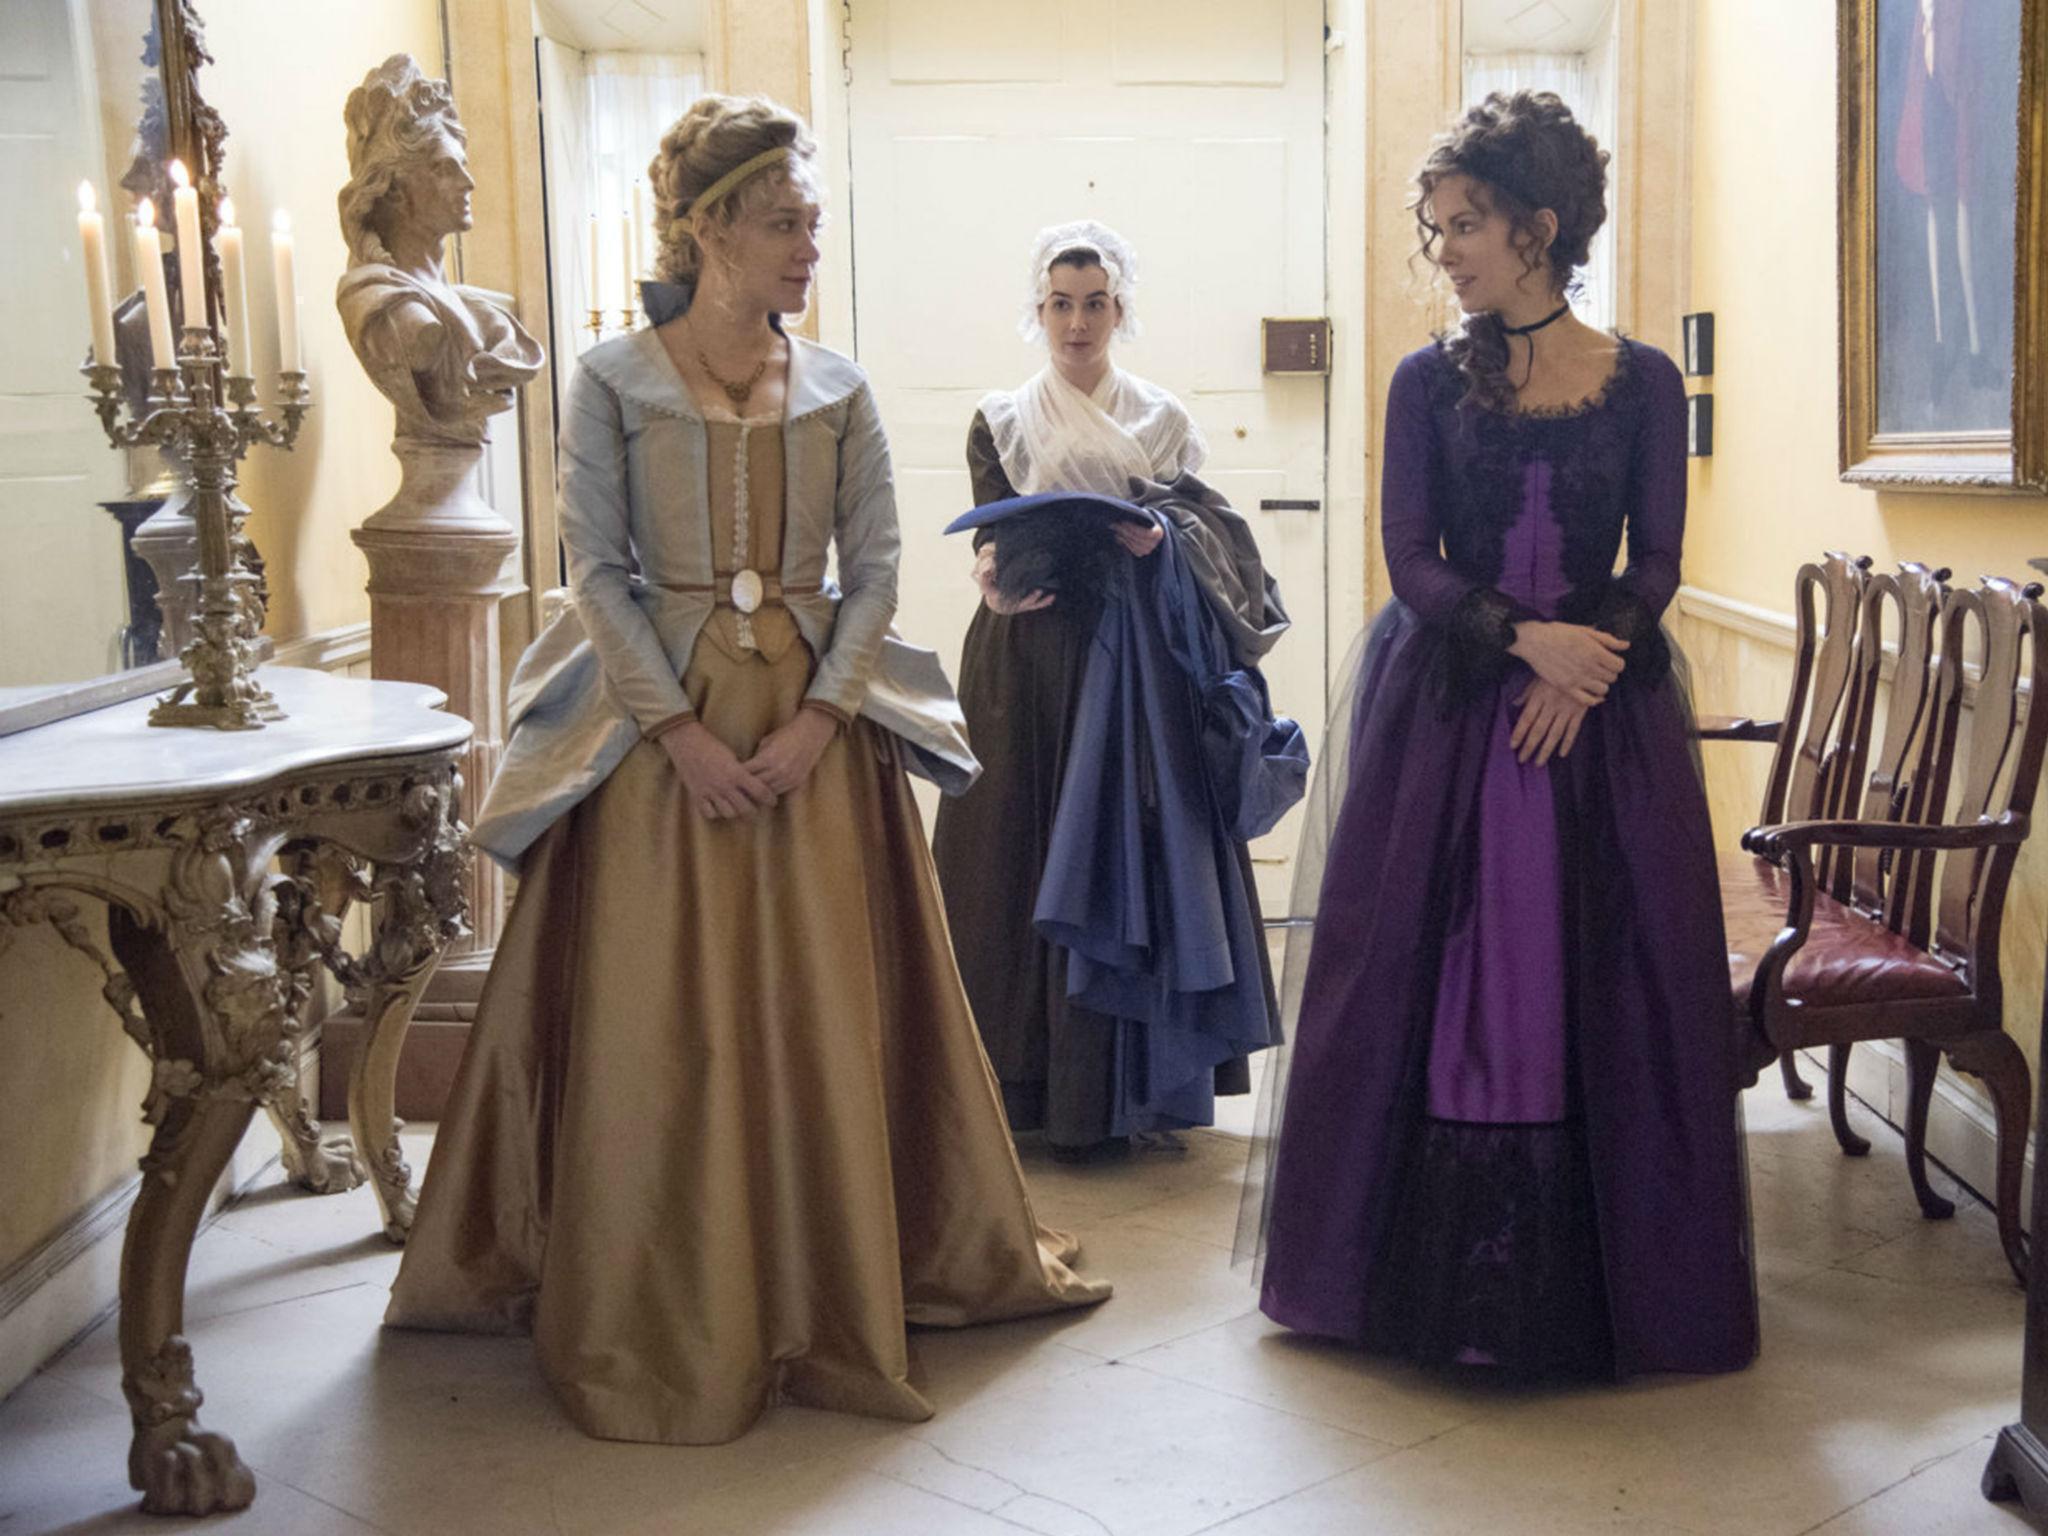 &#13;
Chloe Sevigny and Kate Beckinsale star in Love and Friendship (Moviestore/Rex/Shutterstock)&#13;